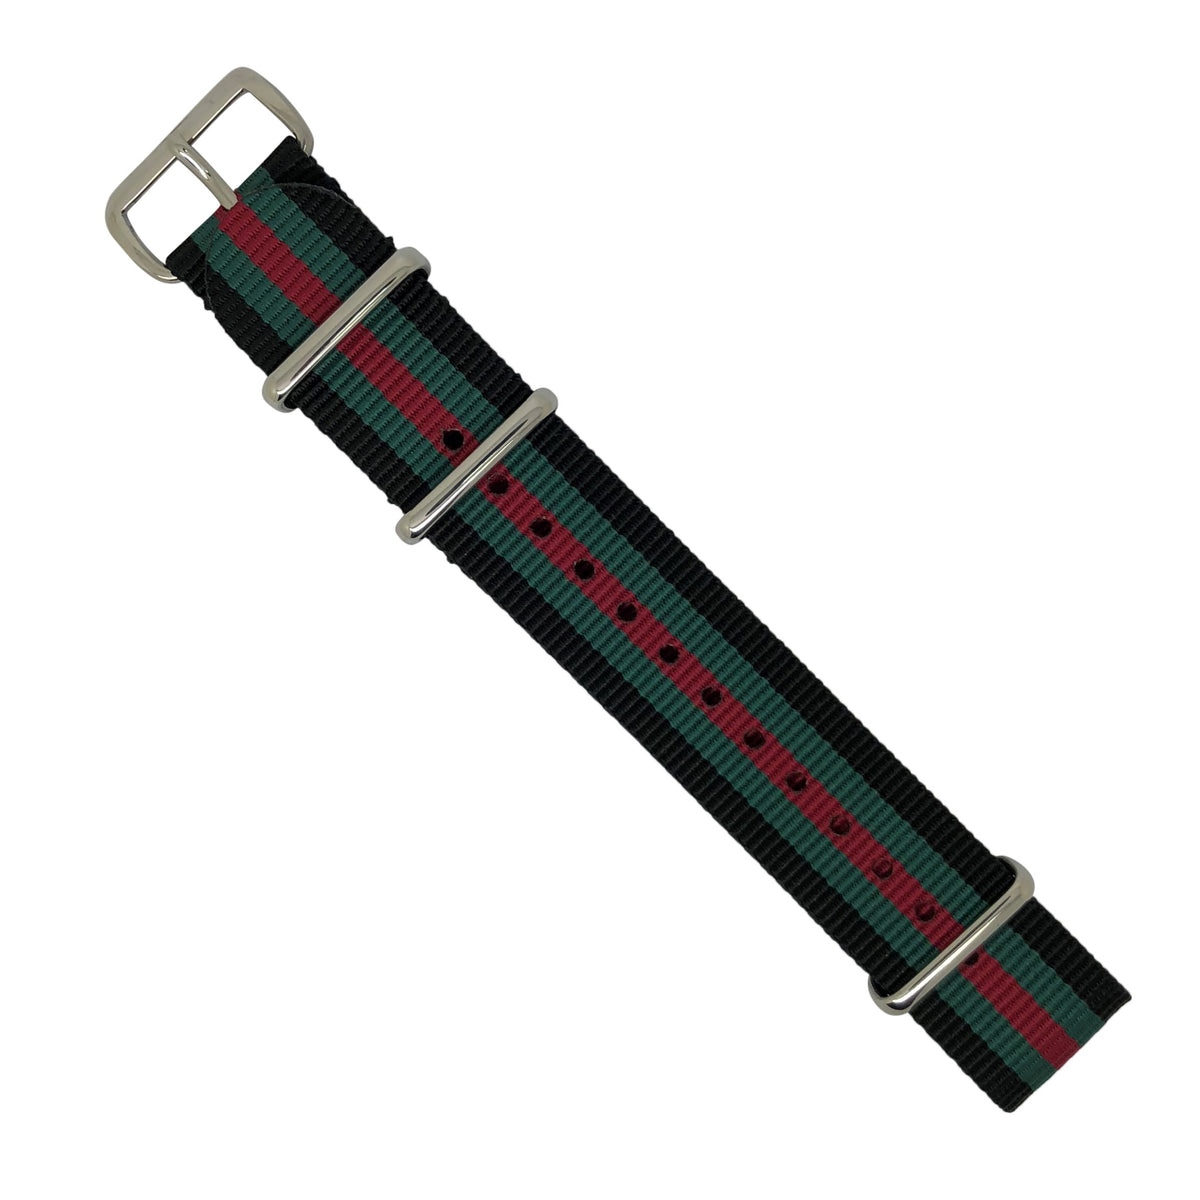 Premium Nato Strap in Black Green Red with Polished Silver Buckle (20mm) - Nomad Watch Works Malaysia